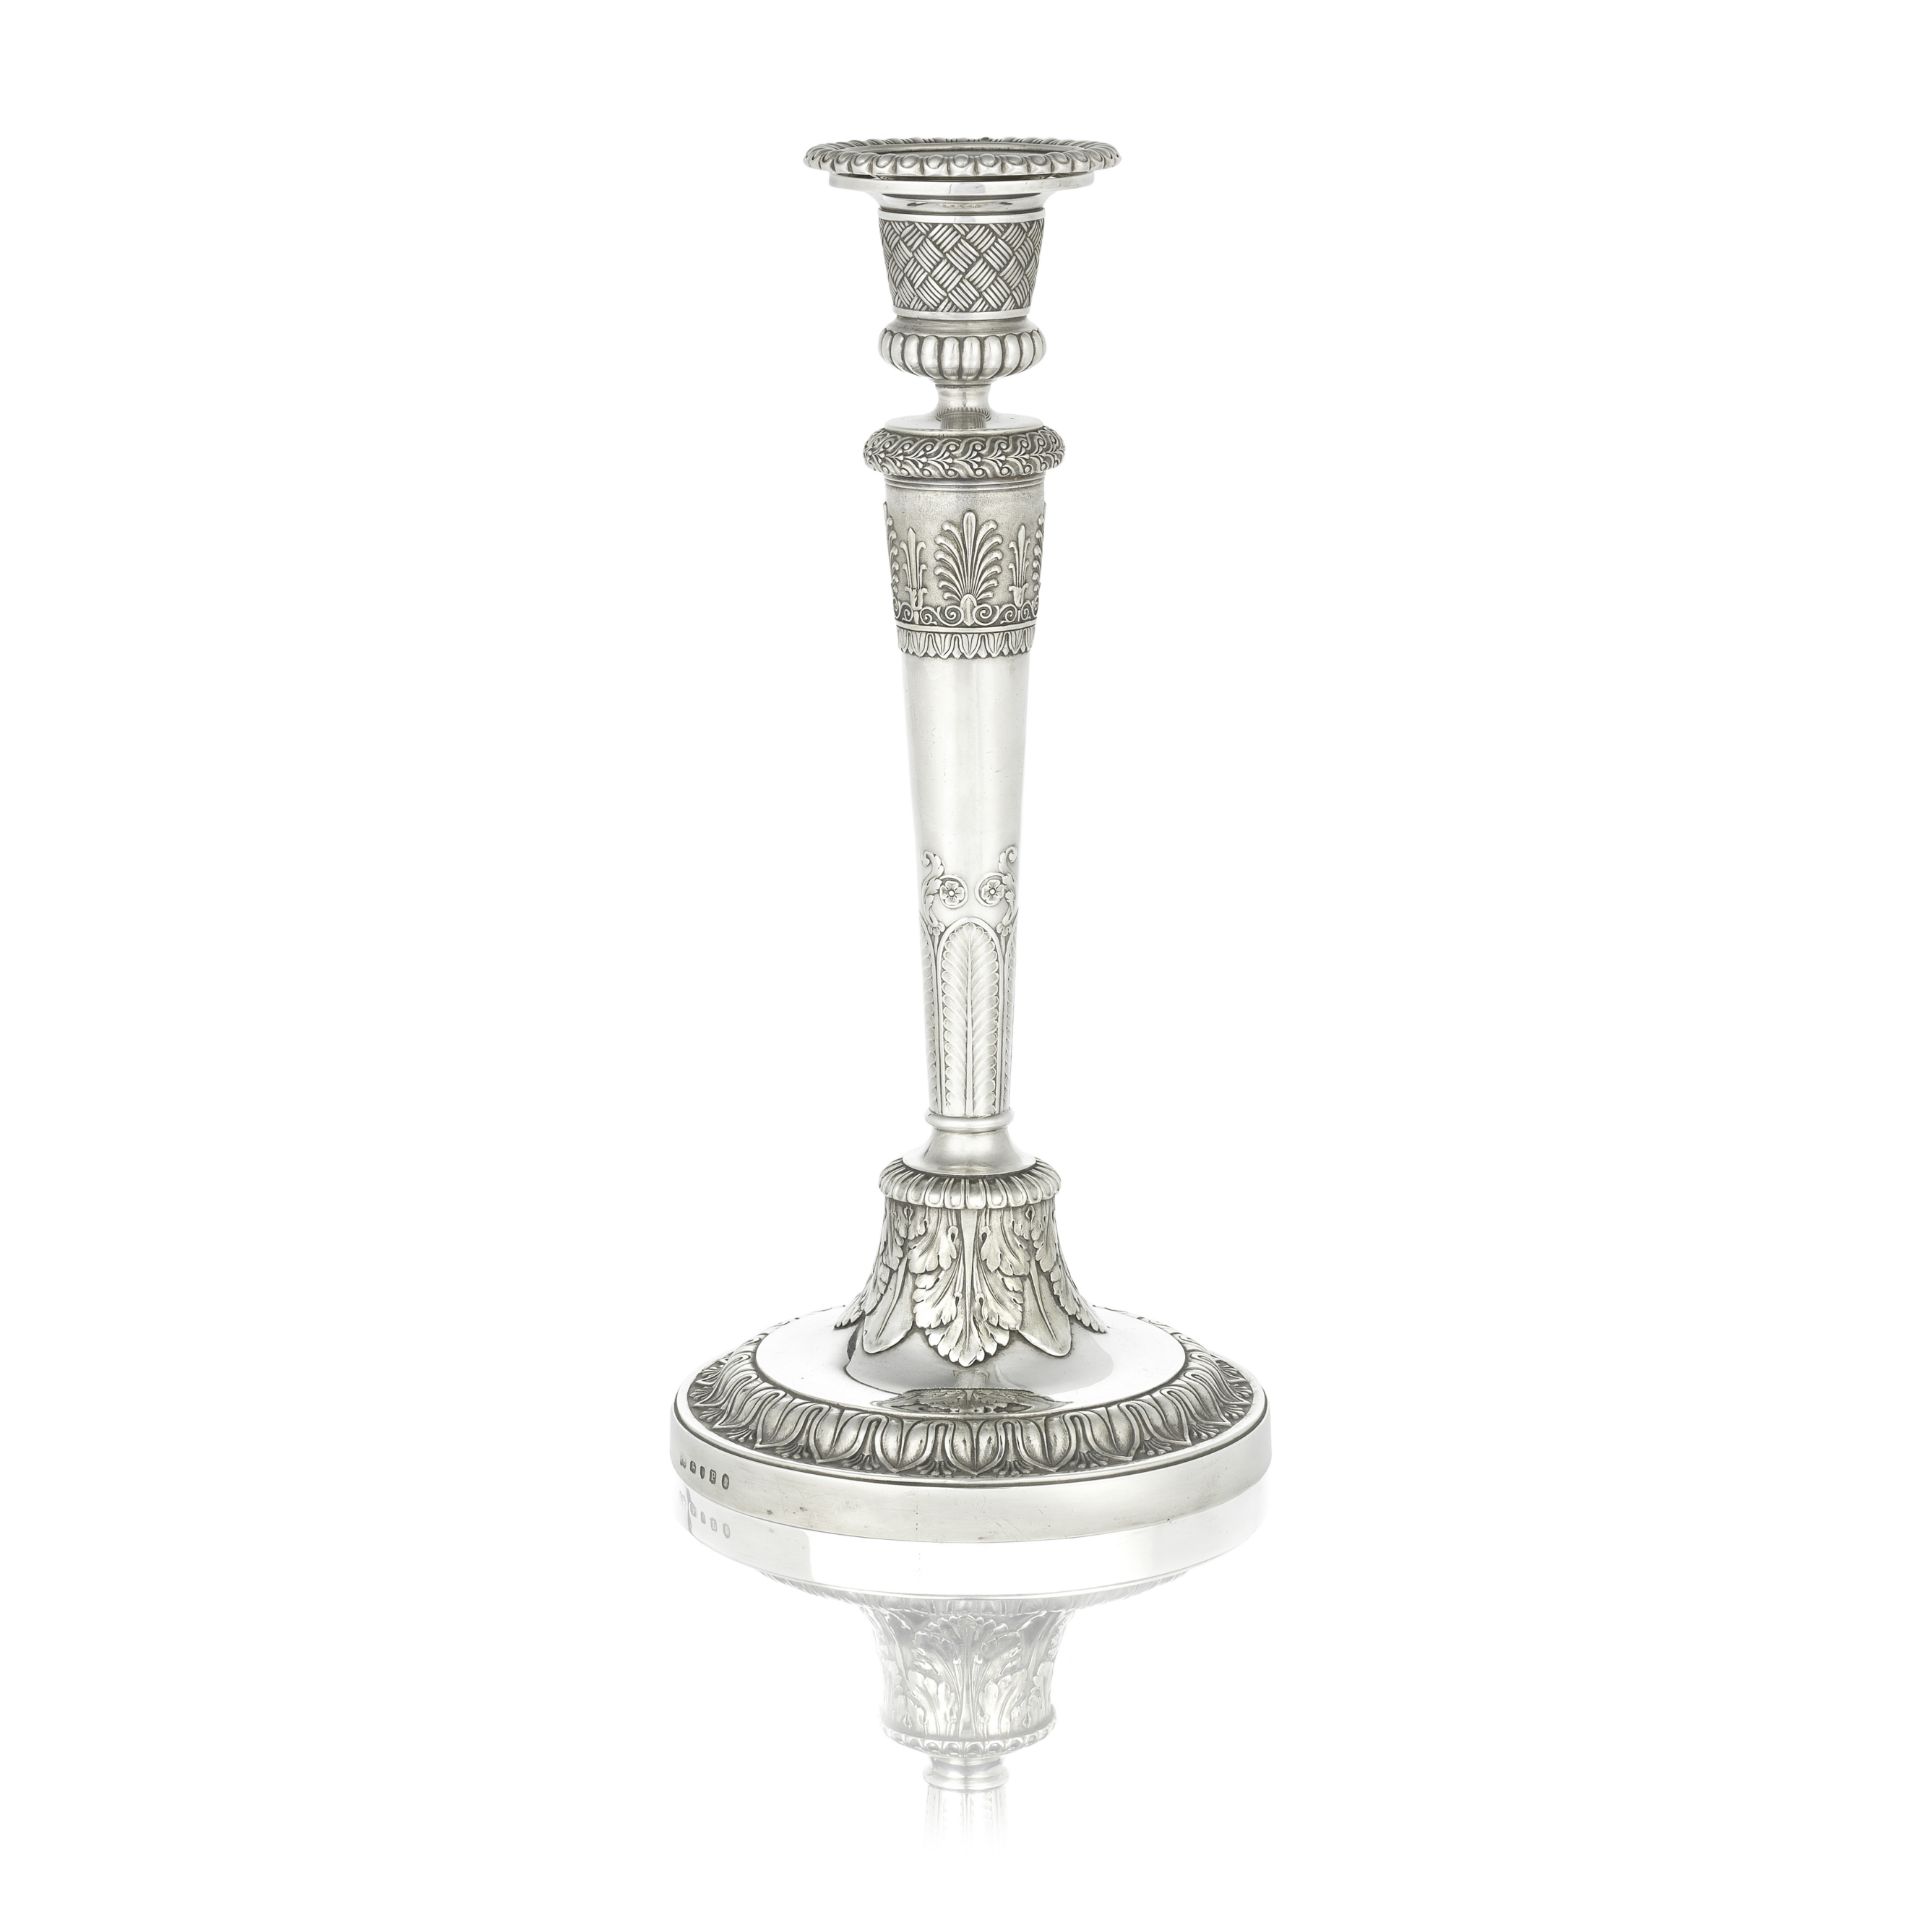 A large George III silver candlestick Paul Storr, London 1810